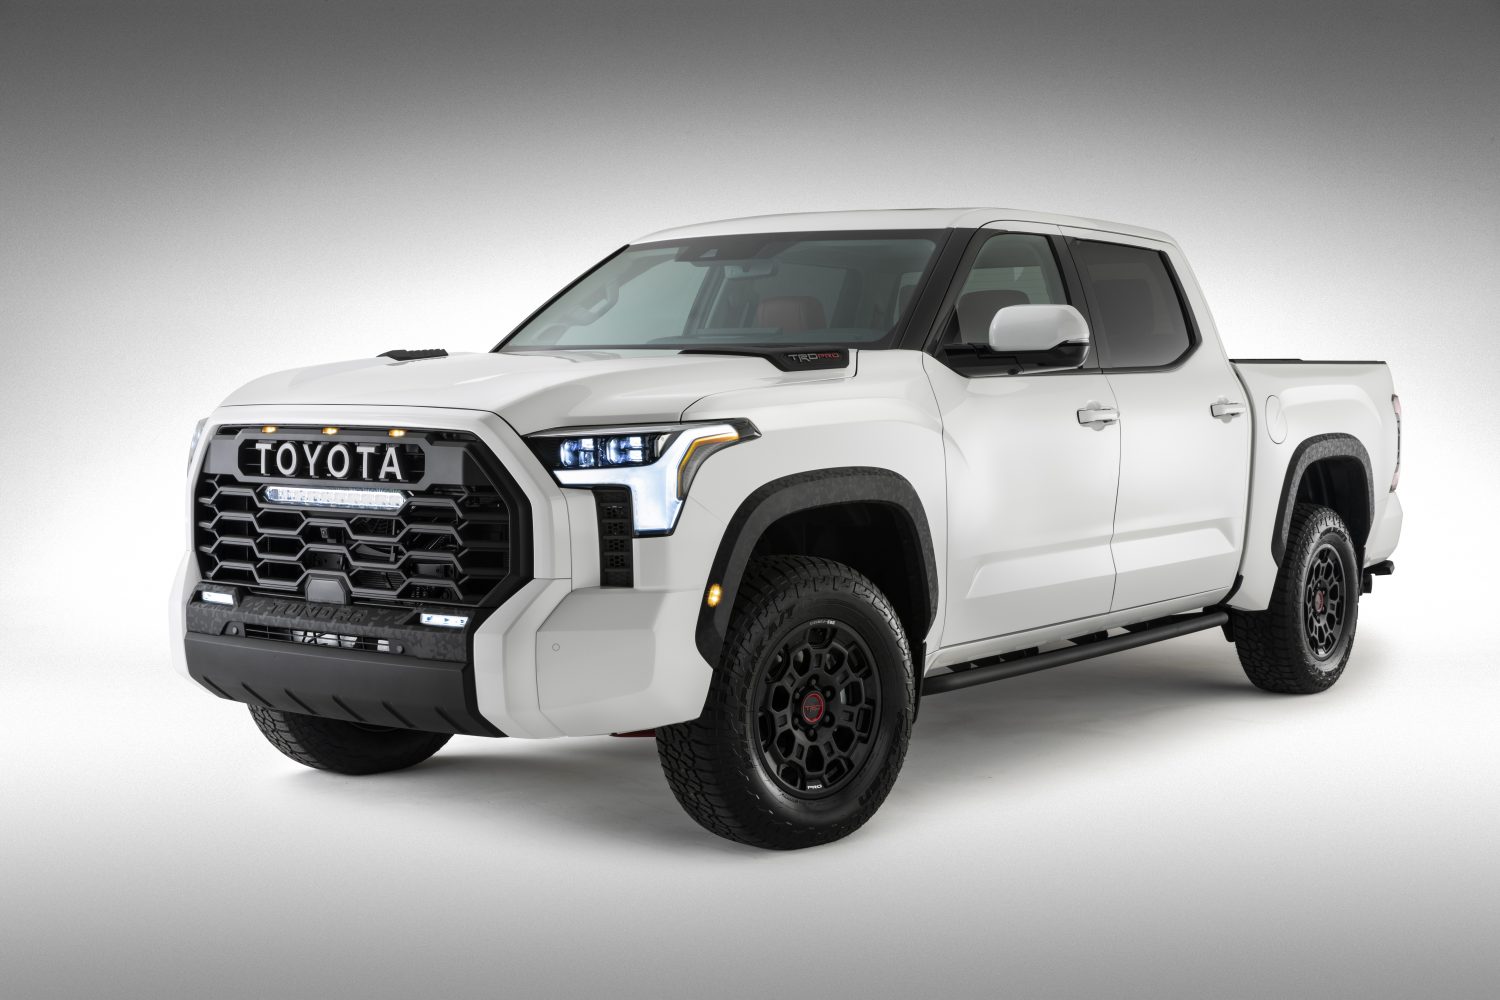 Toyota reveals more of its redesigned 2022 Tundra, including rear coil